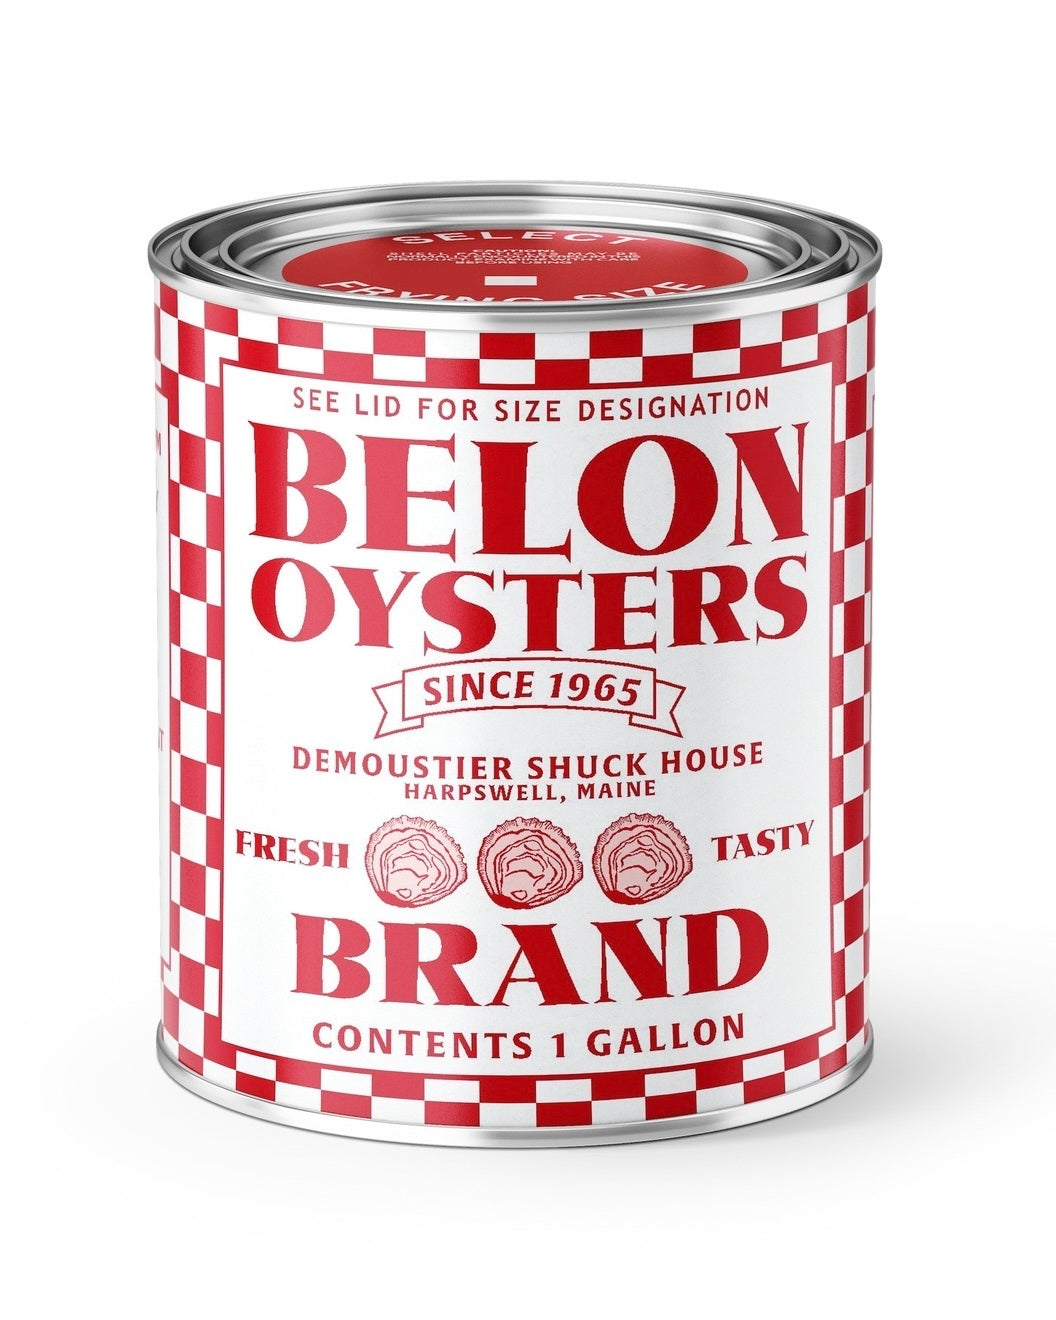 Annapolis Candle Vintage Style Tin Oyster Candle